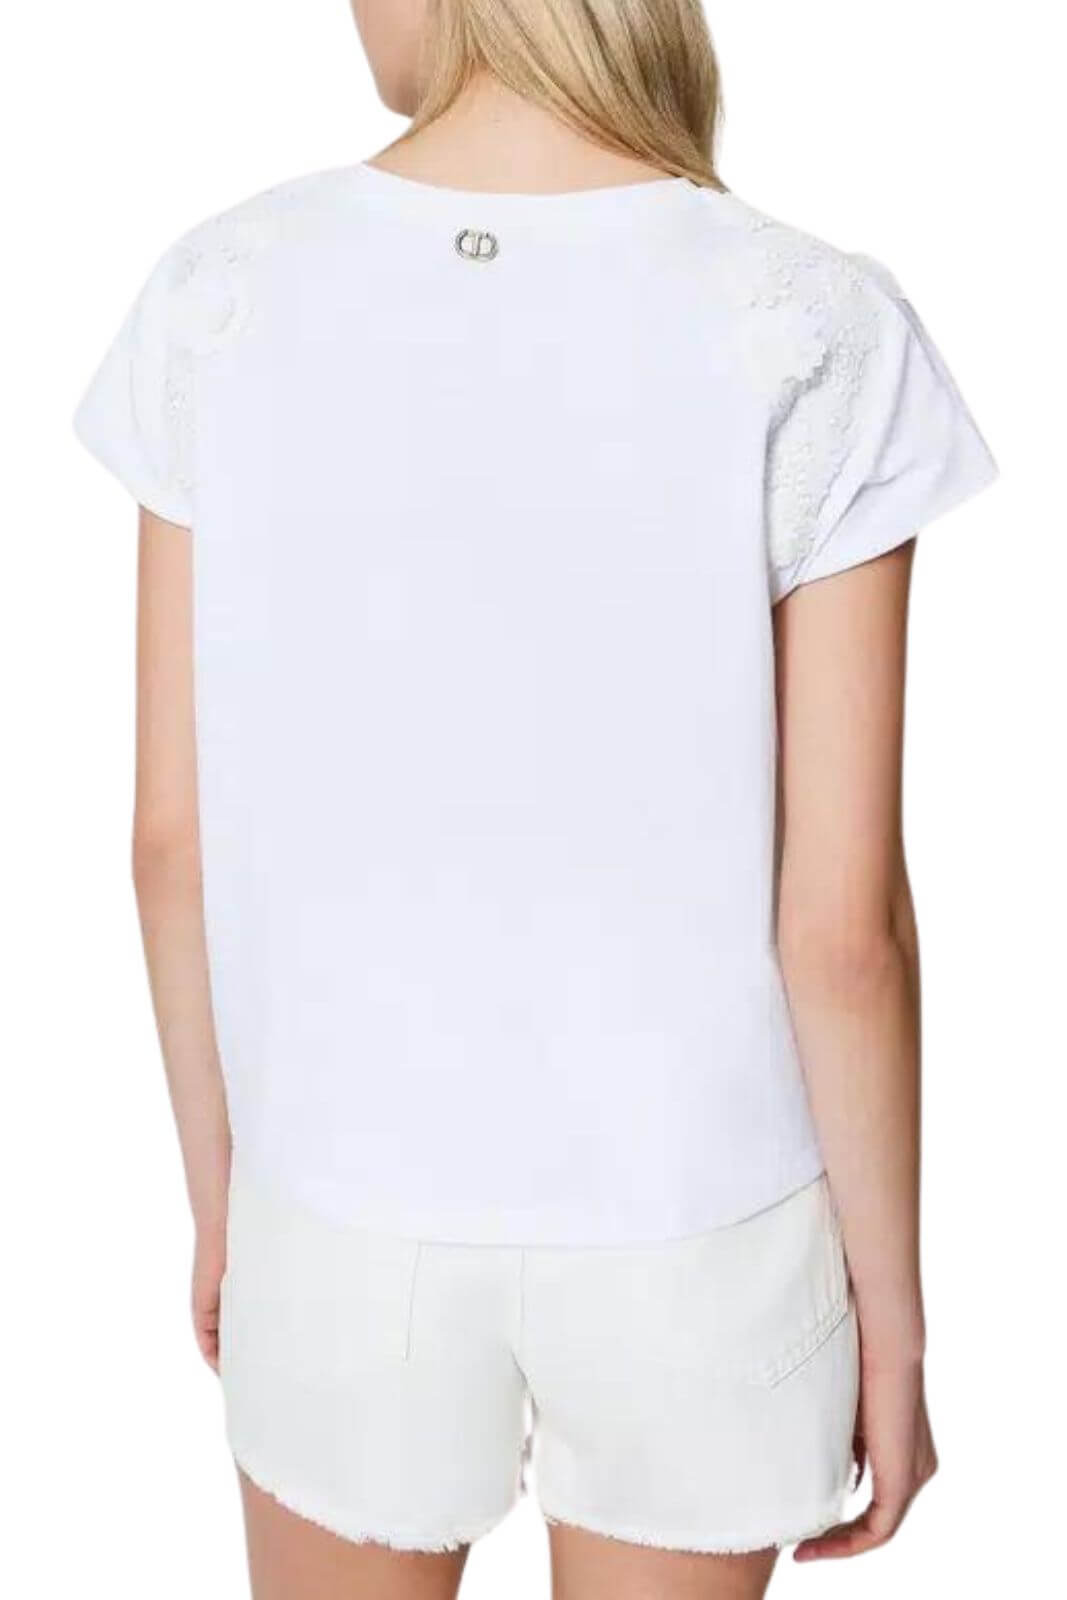 Twinset Milano T Shirt donna con patch floreali